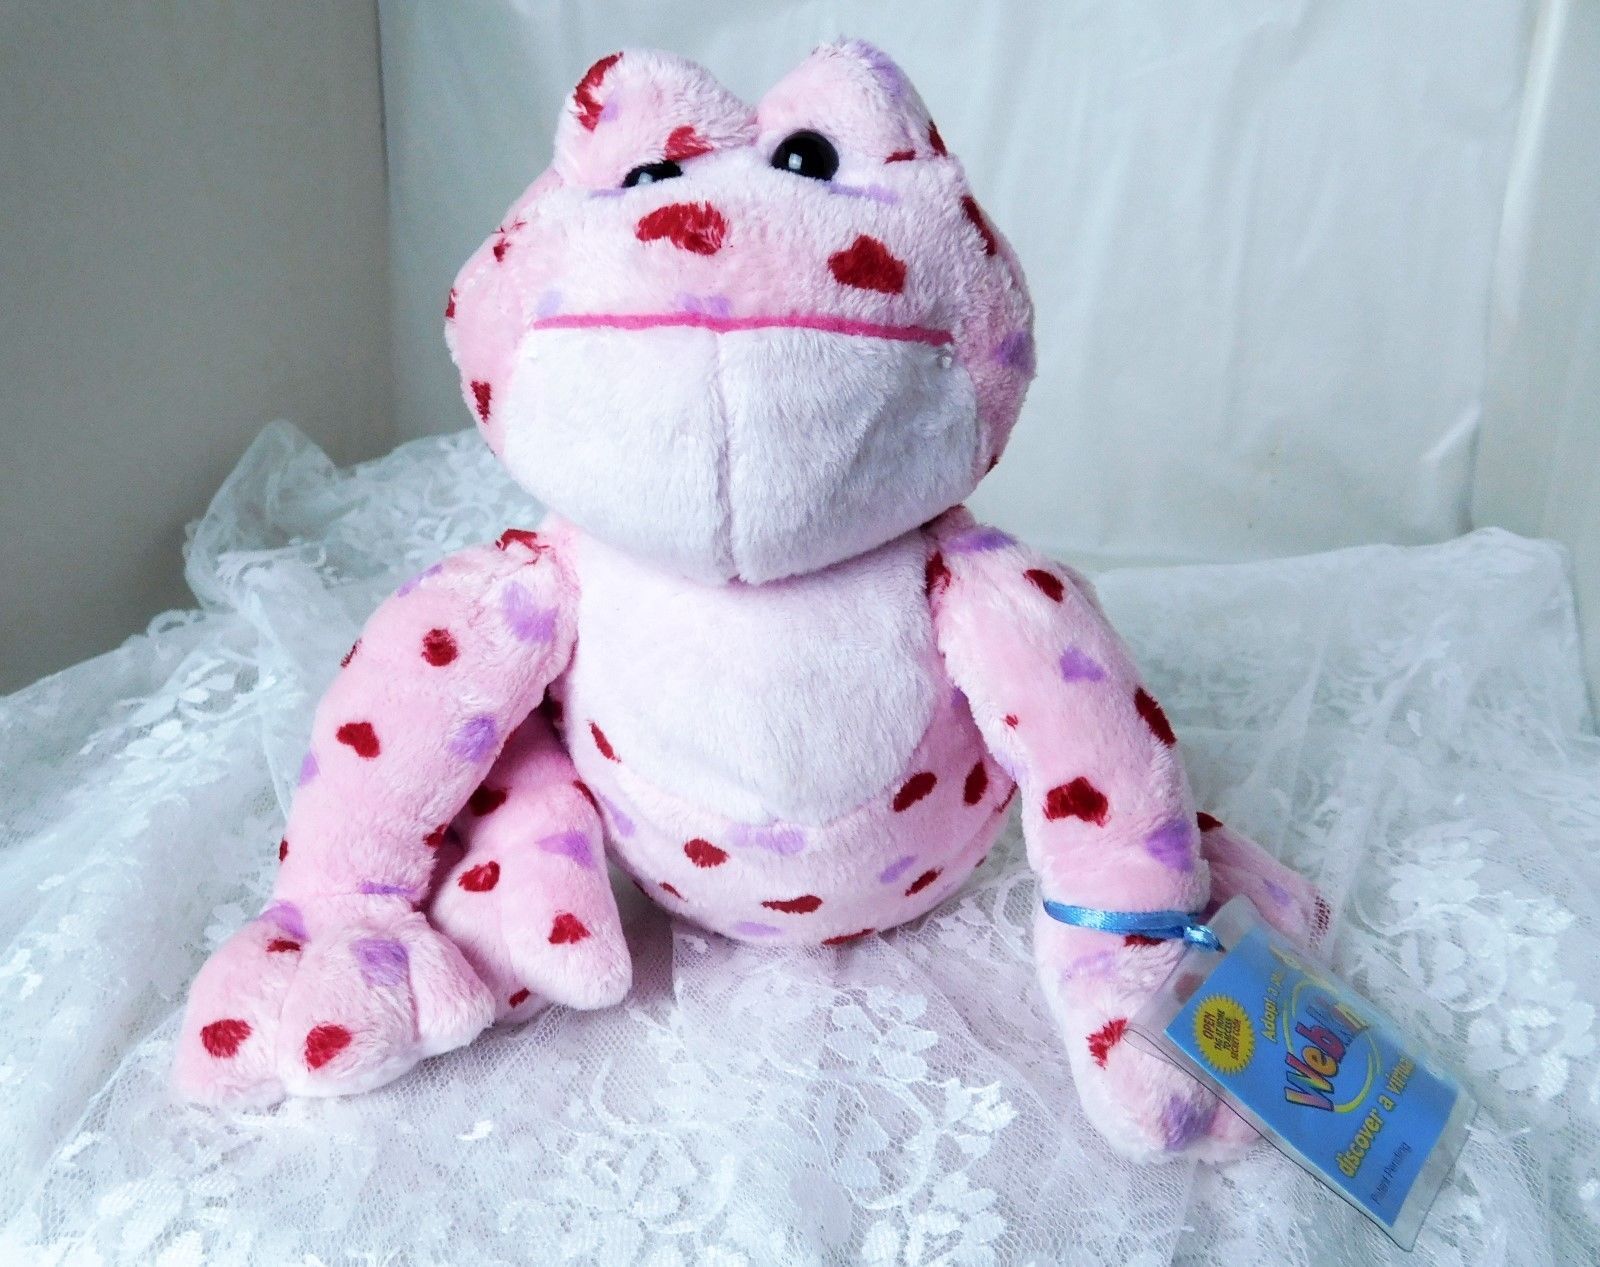 GANZ Plush Love Frog Webkinz 8" Pink Plush Toy with Tag HM144 - Super Cute! - £9.74 GBP